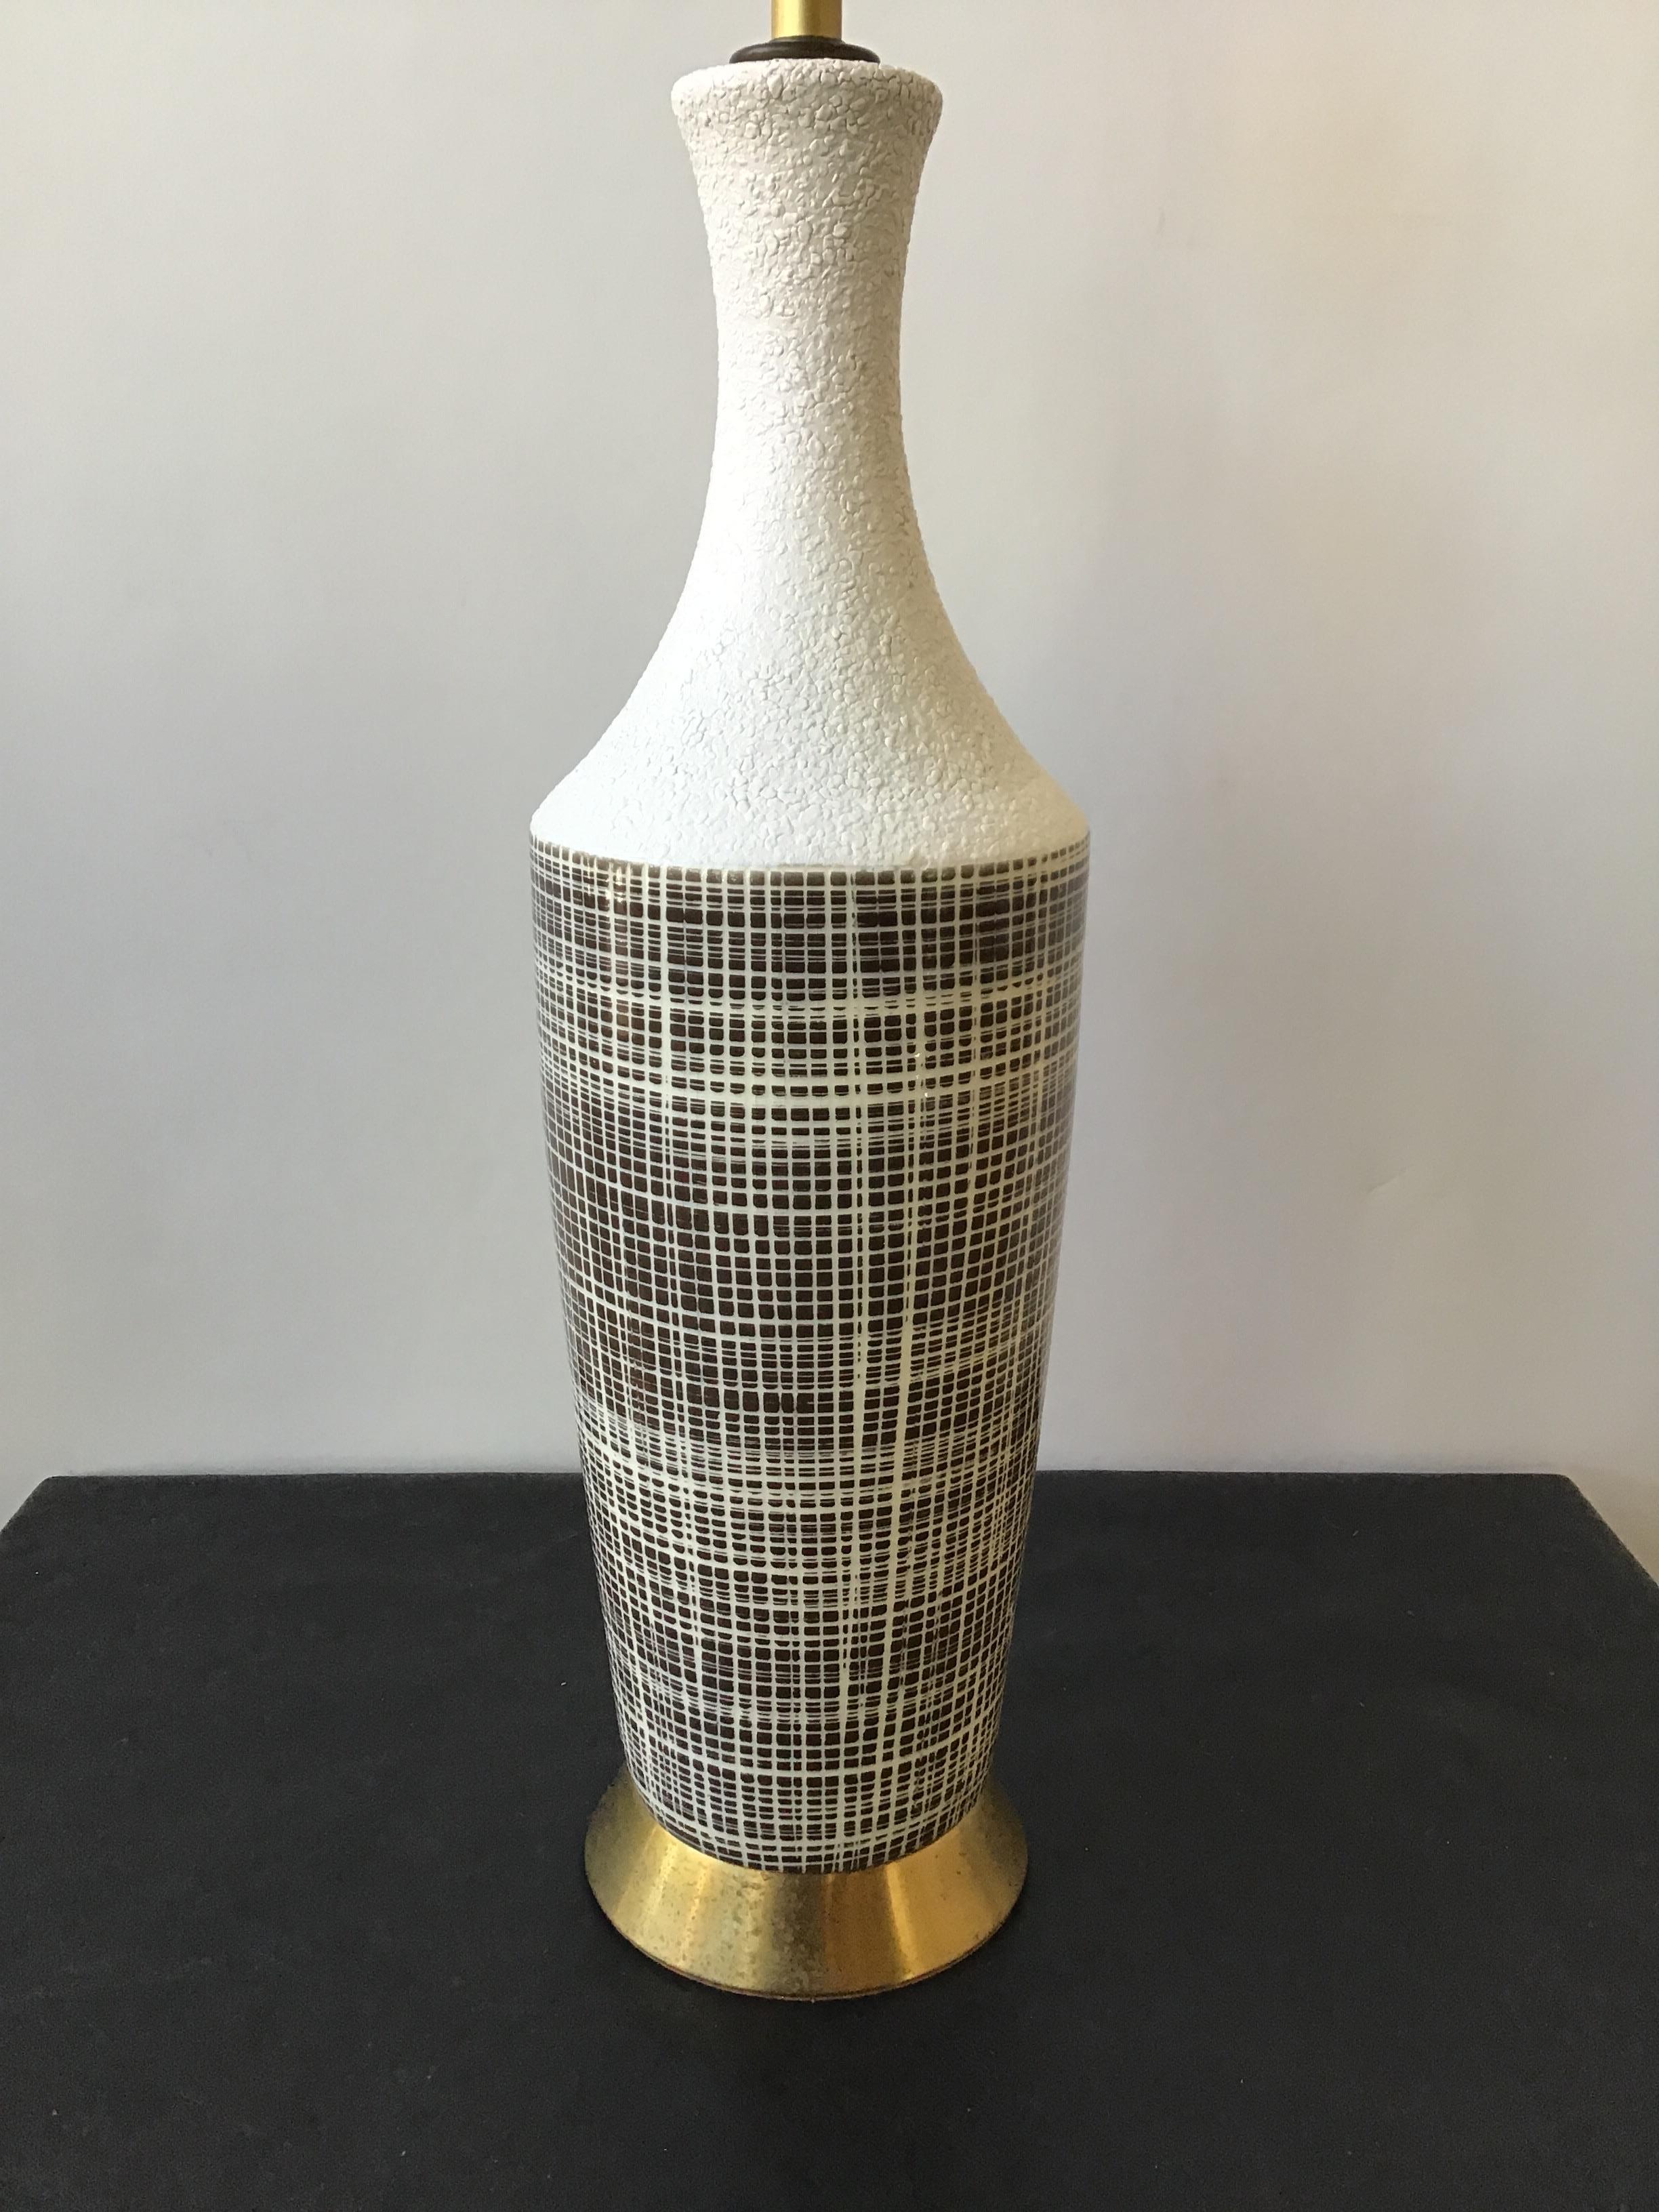 1950s ceramic grid pattern brown and white table lamp. Needs rewiring.